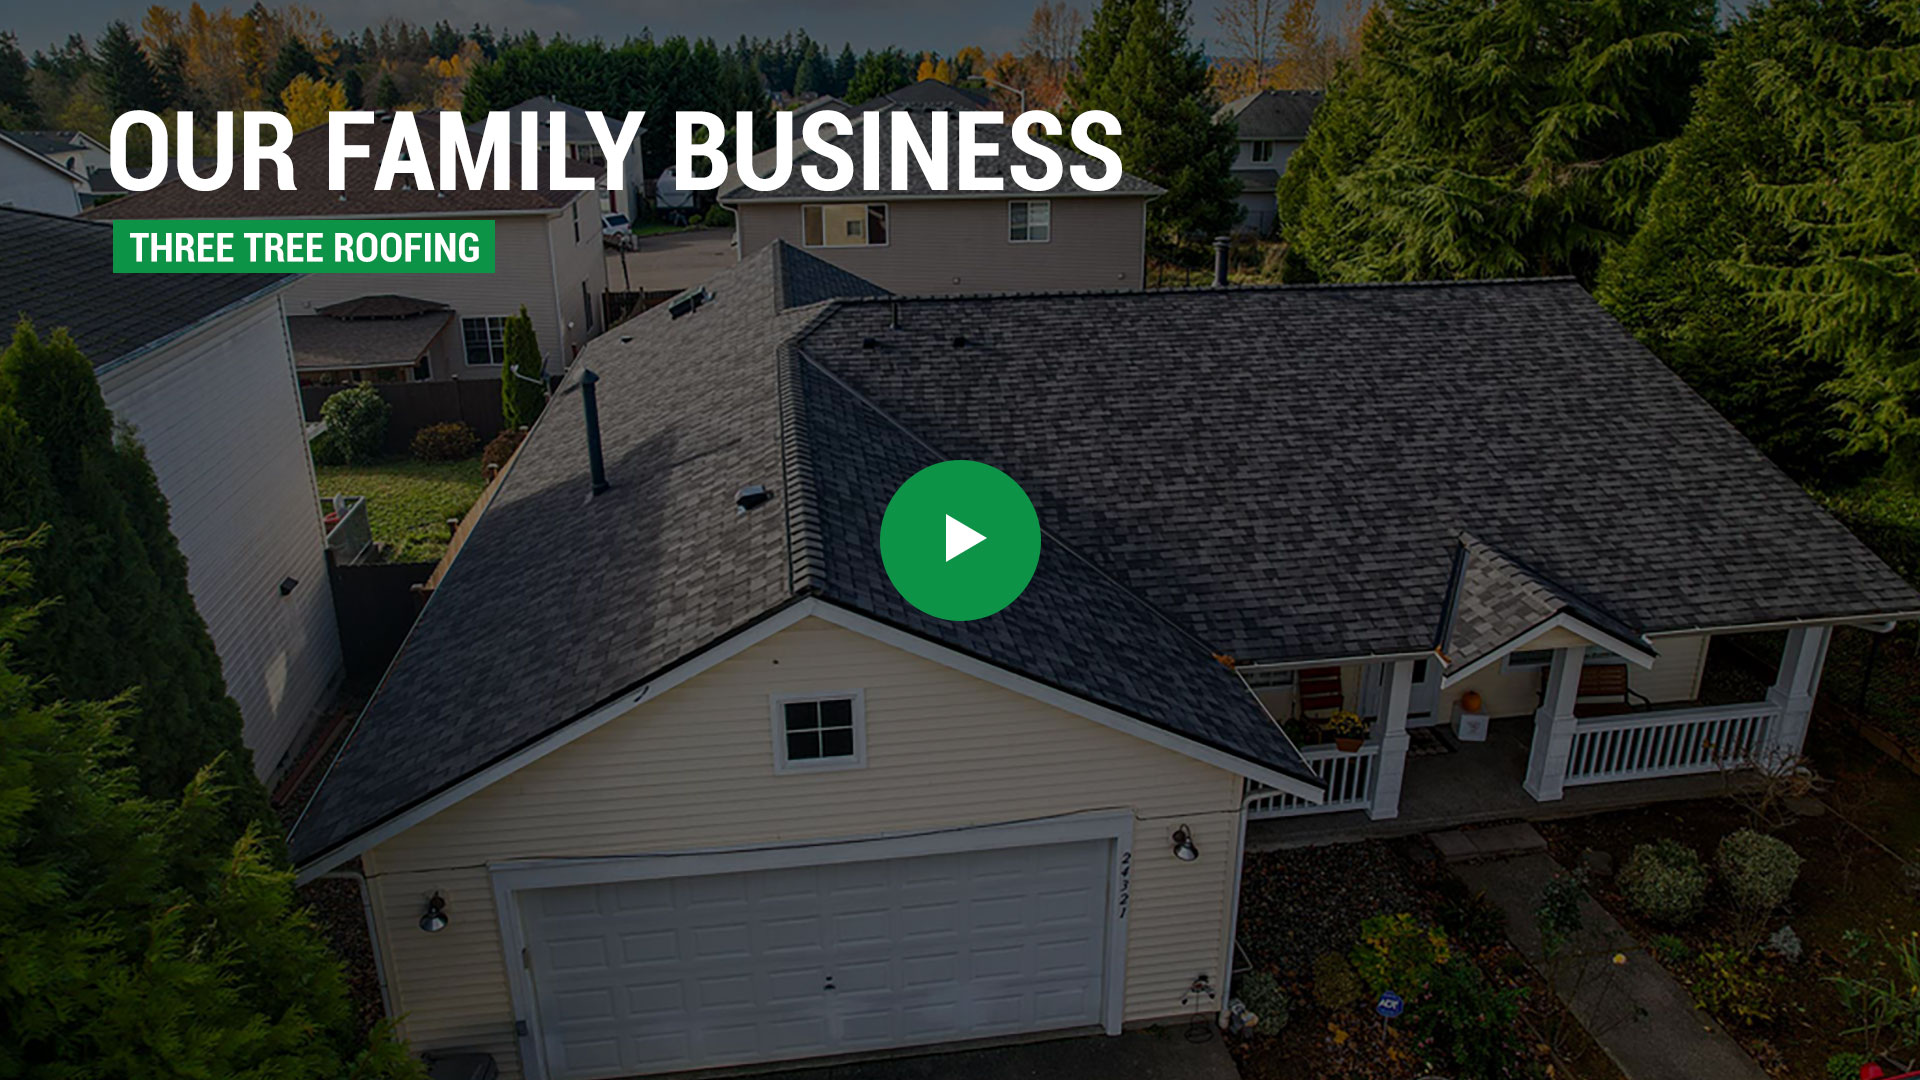 Our Family Roofing Business - Roofing Video